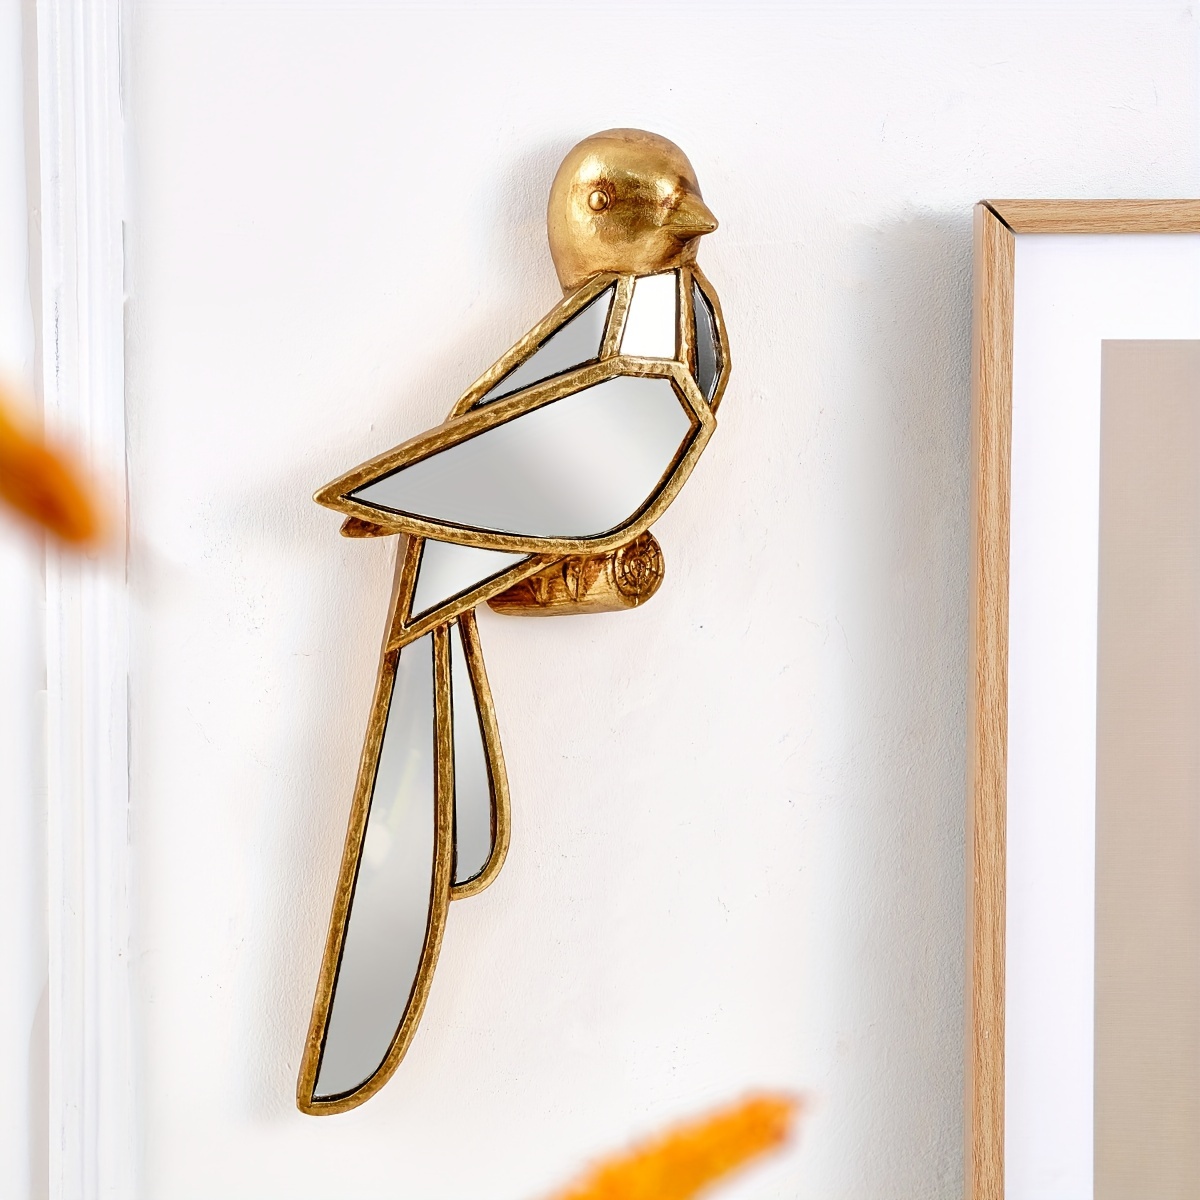 

Unique Bird-shaped Mirror Wall Art - Resin Crafted, Vertical Hanging Decor For Home, Hotel & Restaurant